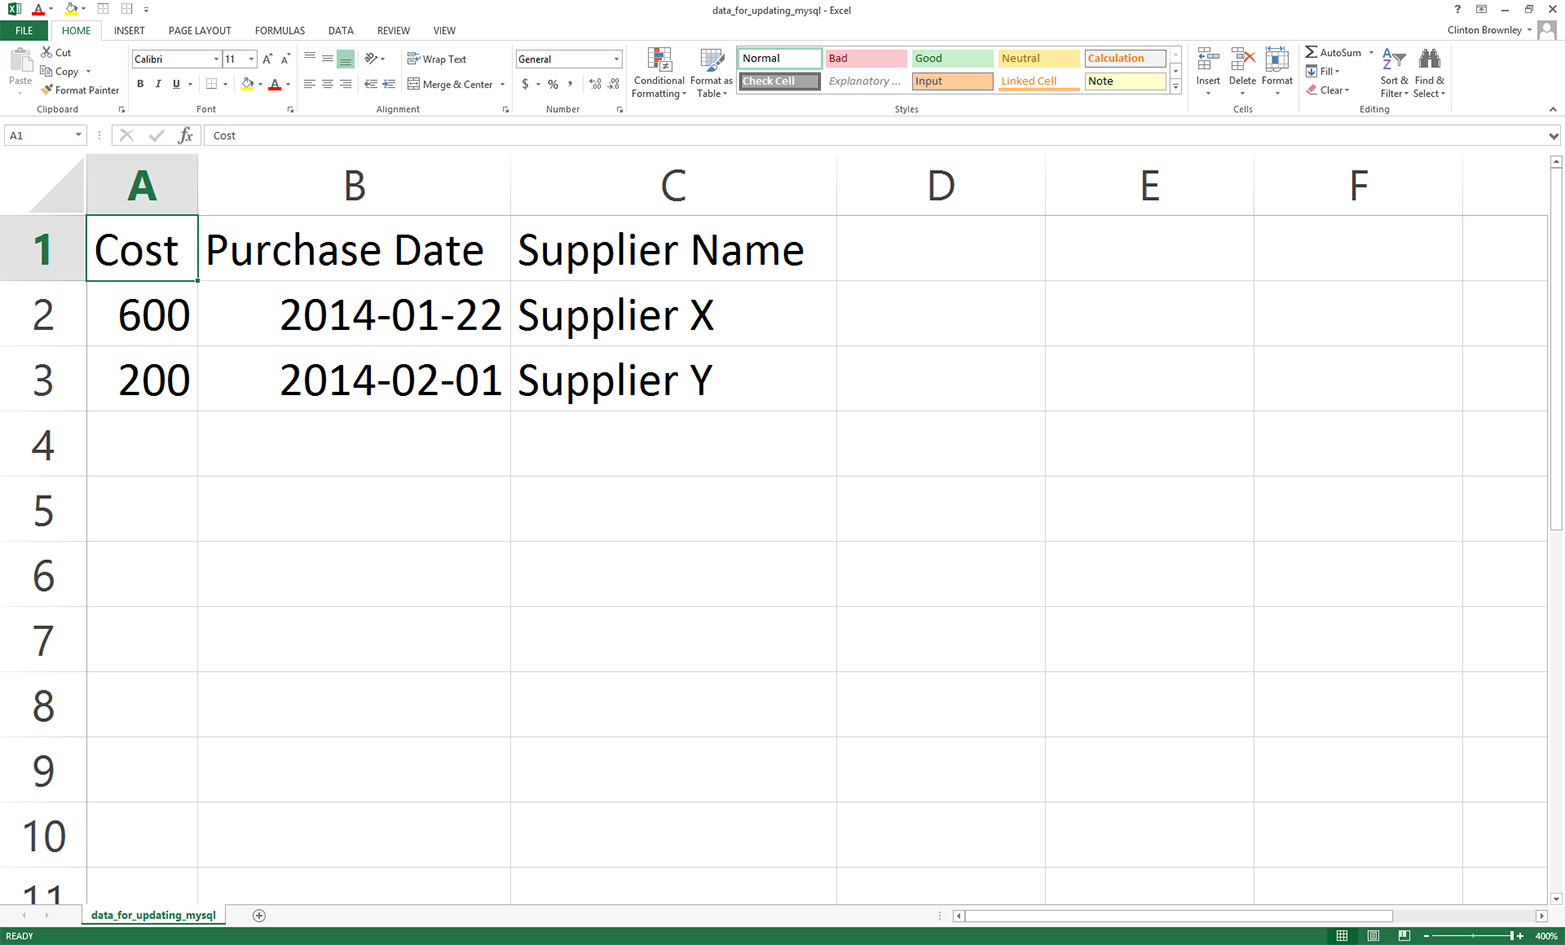 Example data for a CSV file named data_for_updating_mysql.csv, displayed in an Excel worksheet